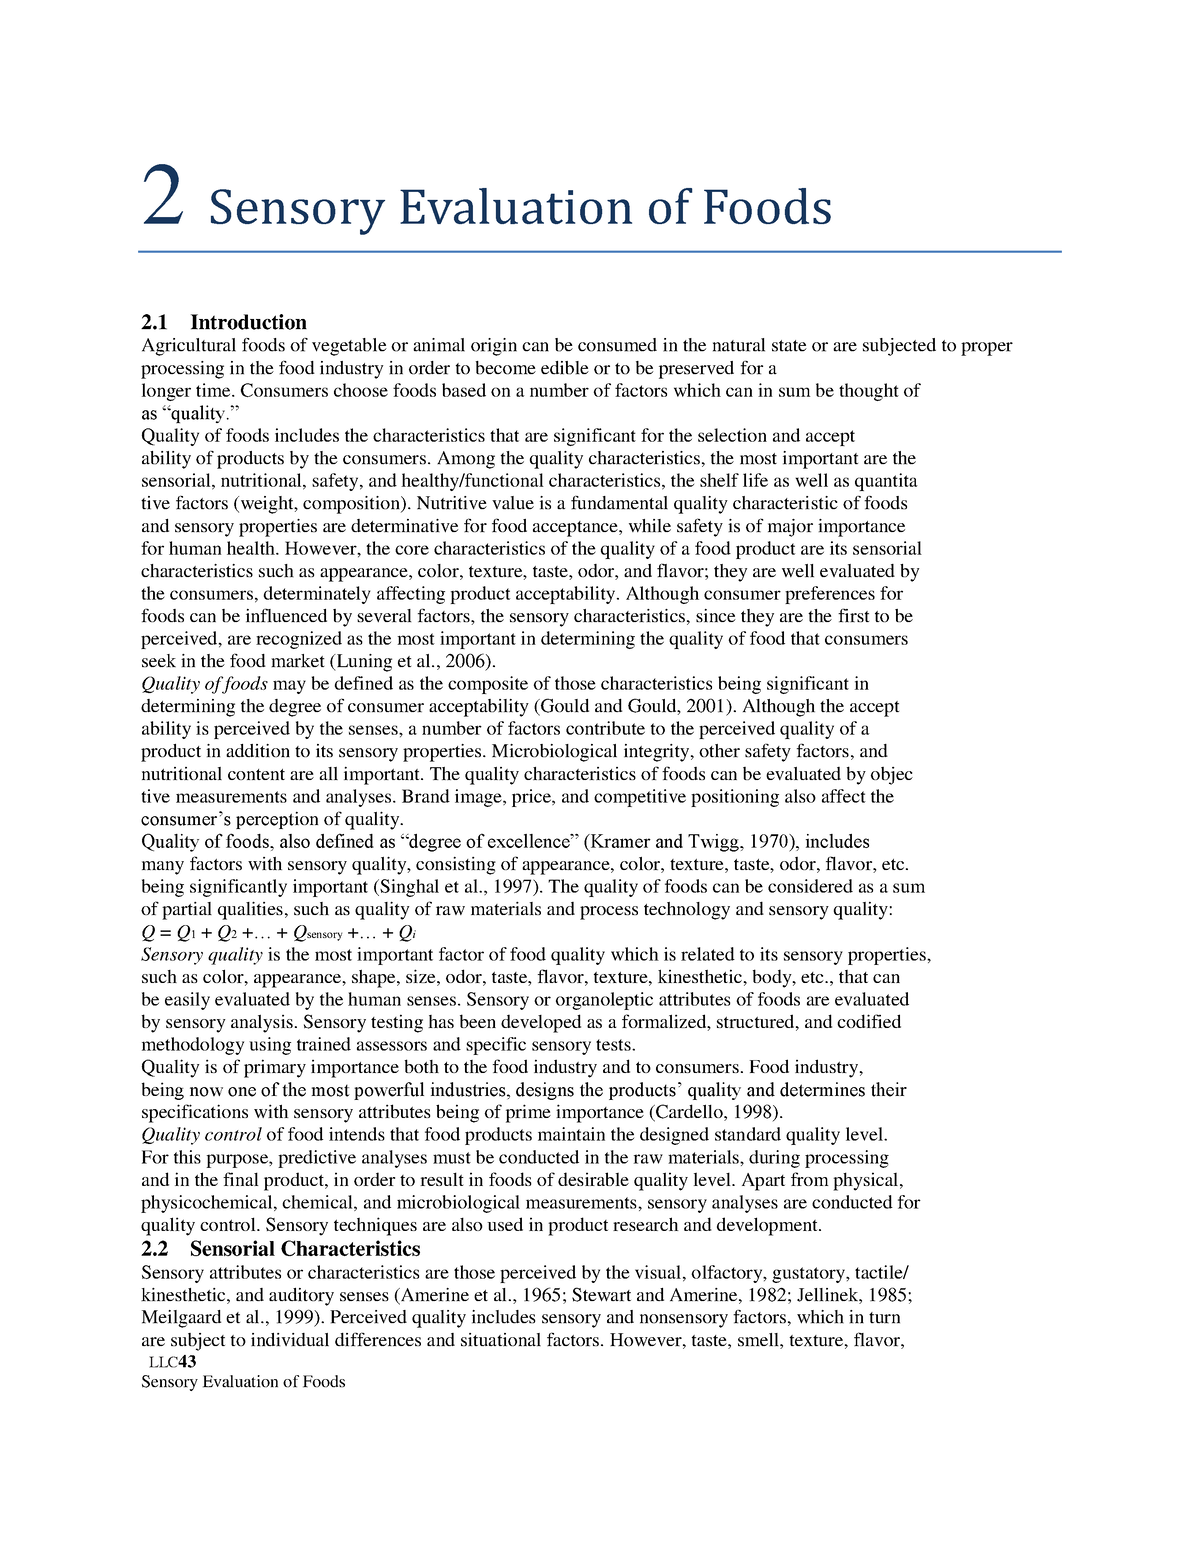 sensory evaluation of food research paper